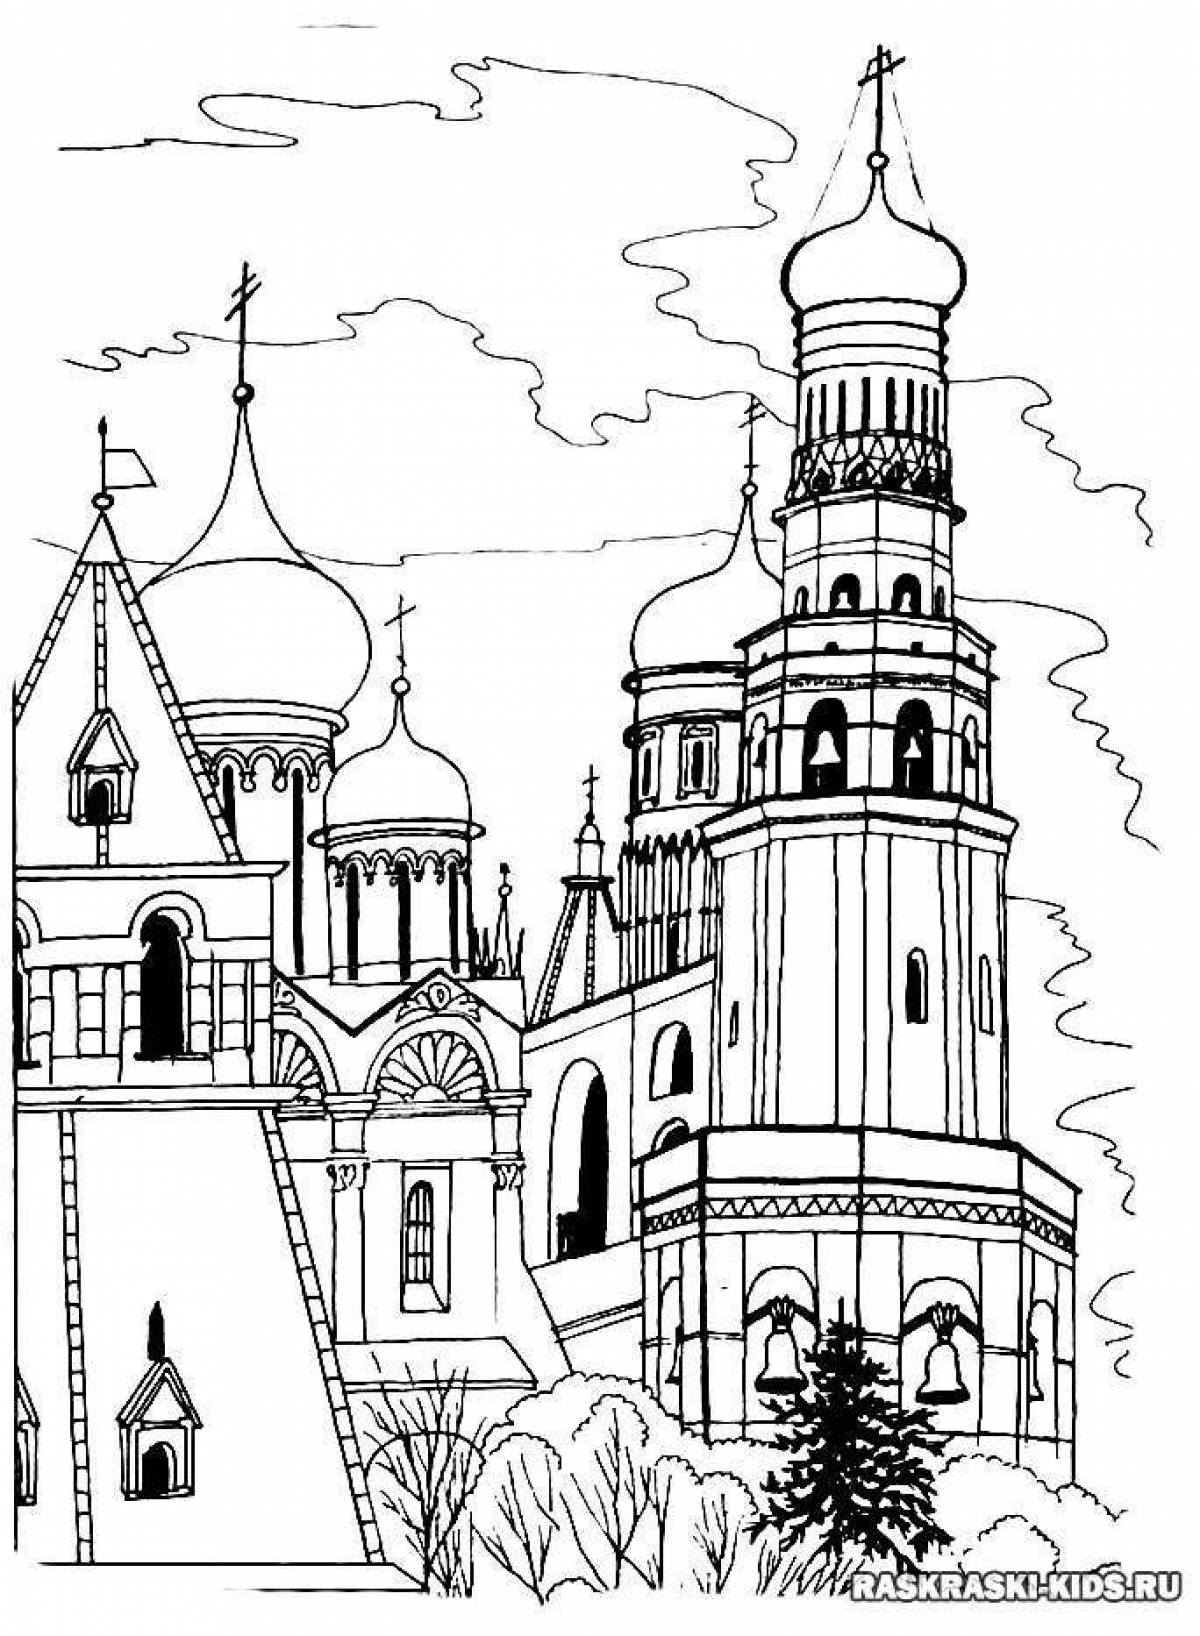 Exotic temples and churches coloring pages for kids